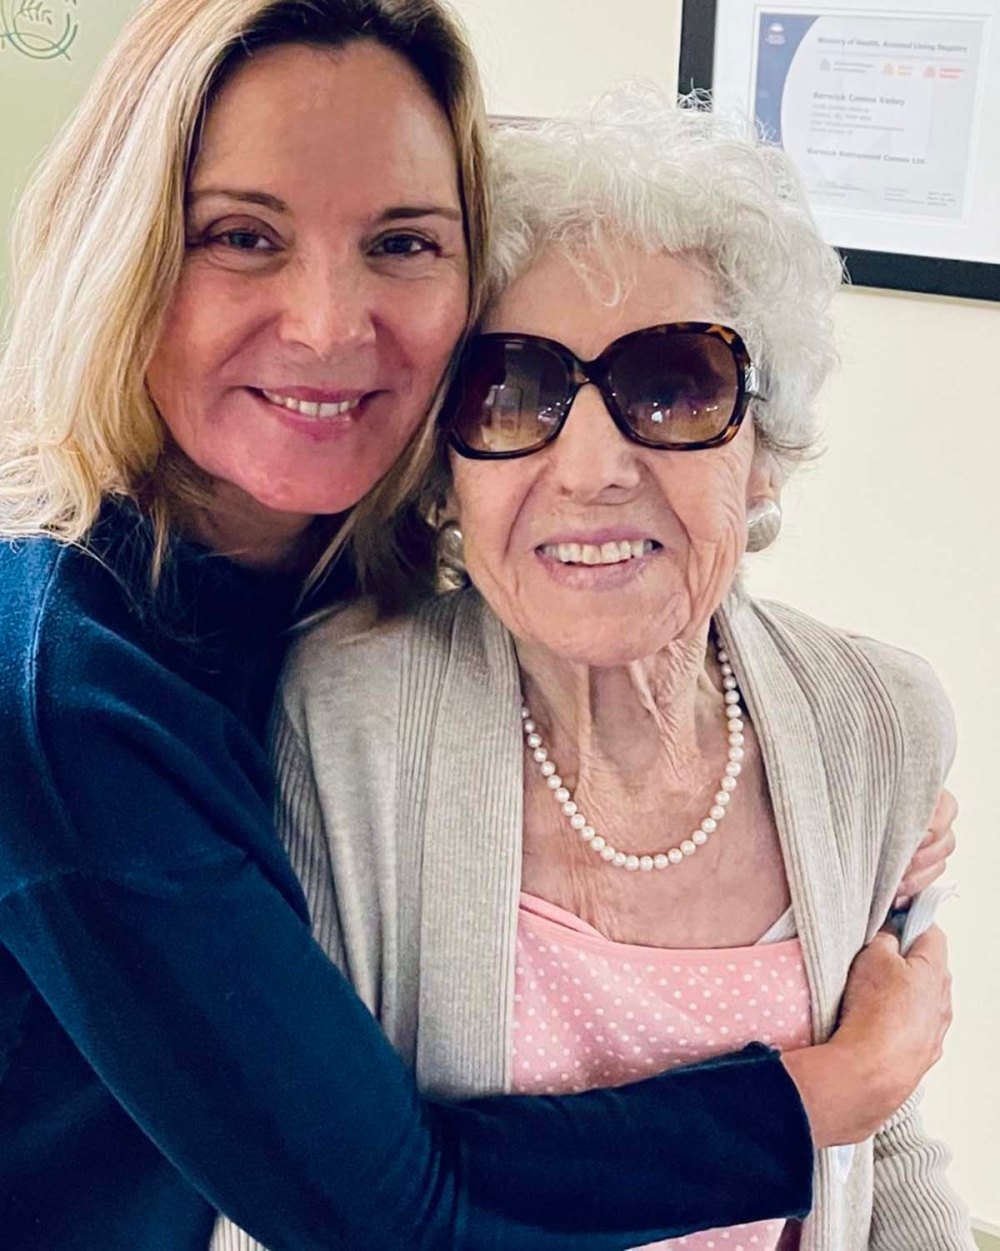 Kim Cattrall Mourns Death of Mom Shane at 93: 'Rest in Peace Mum'